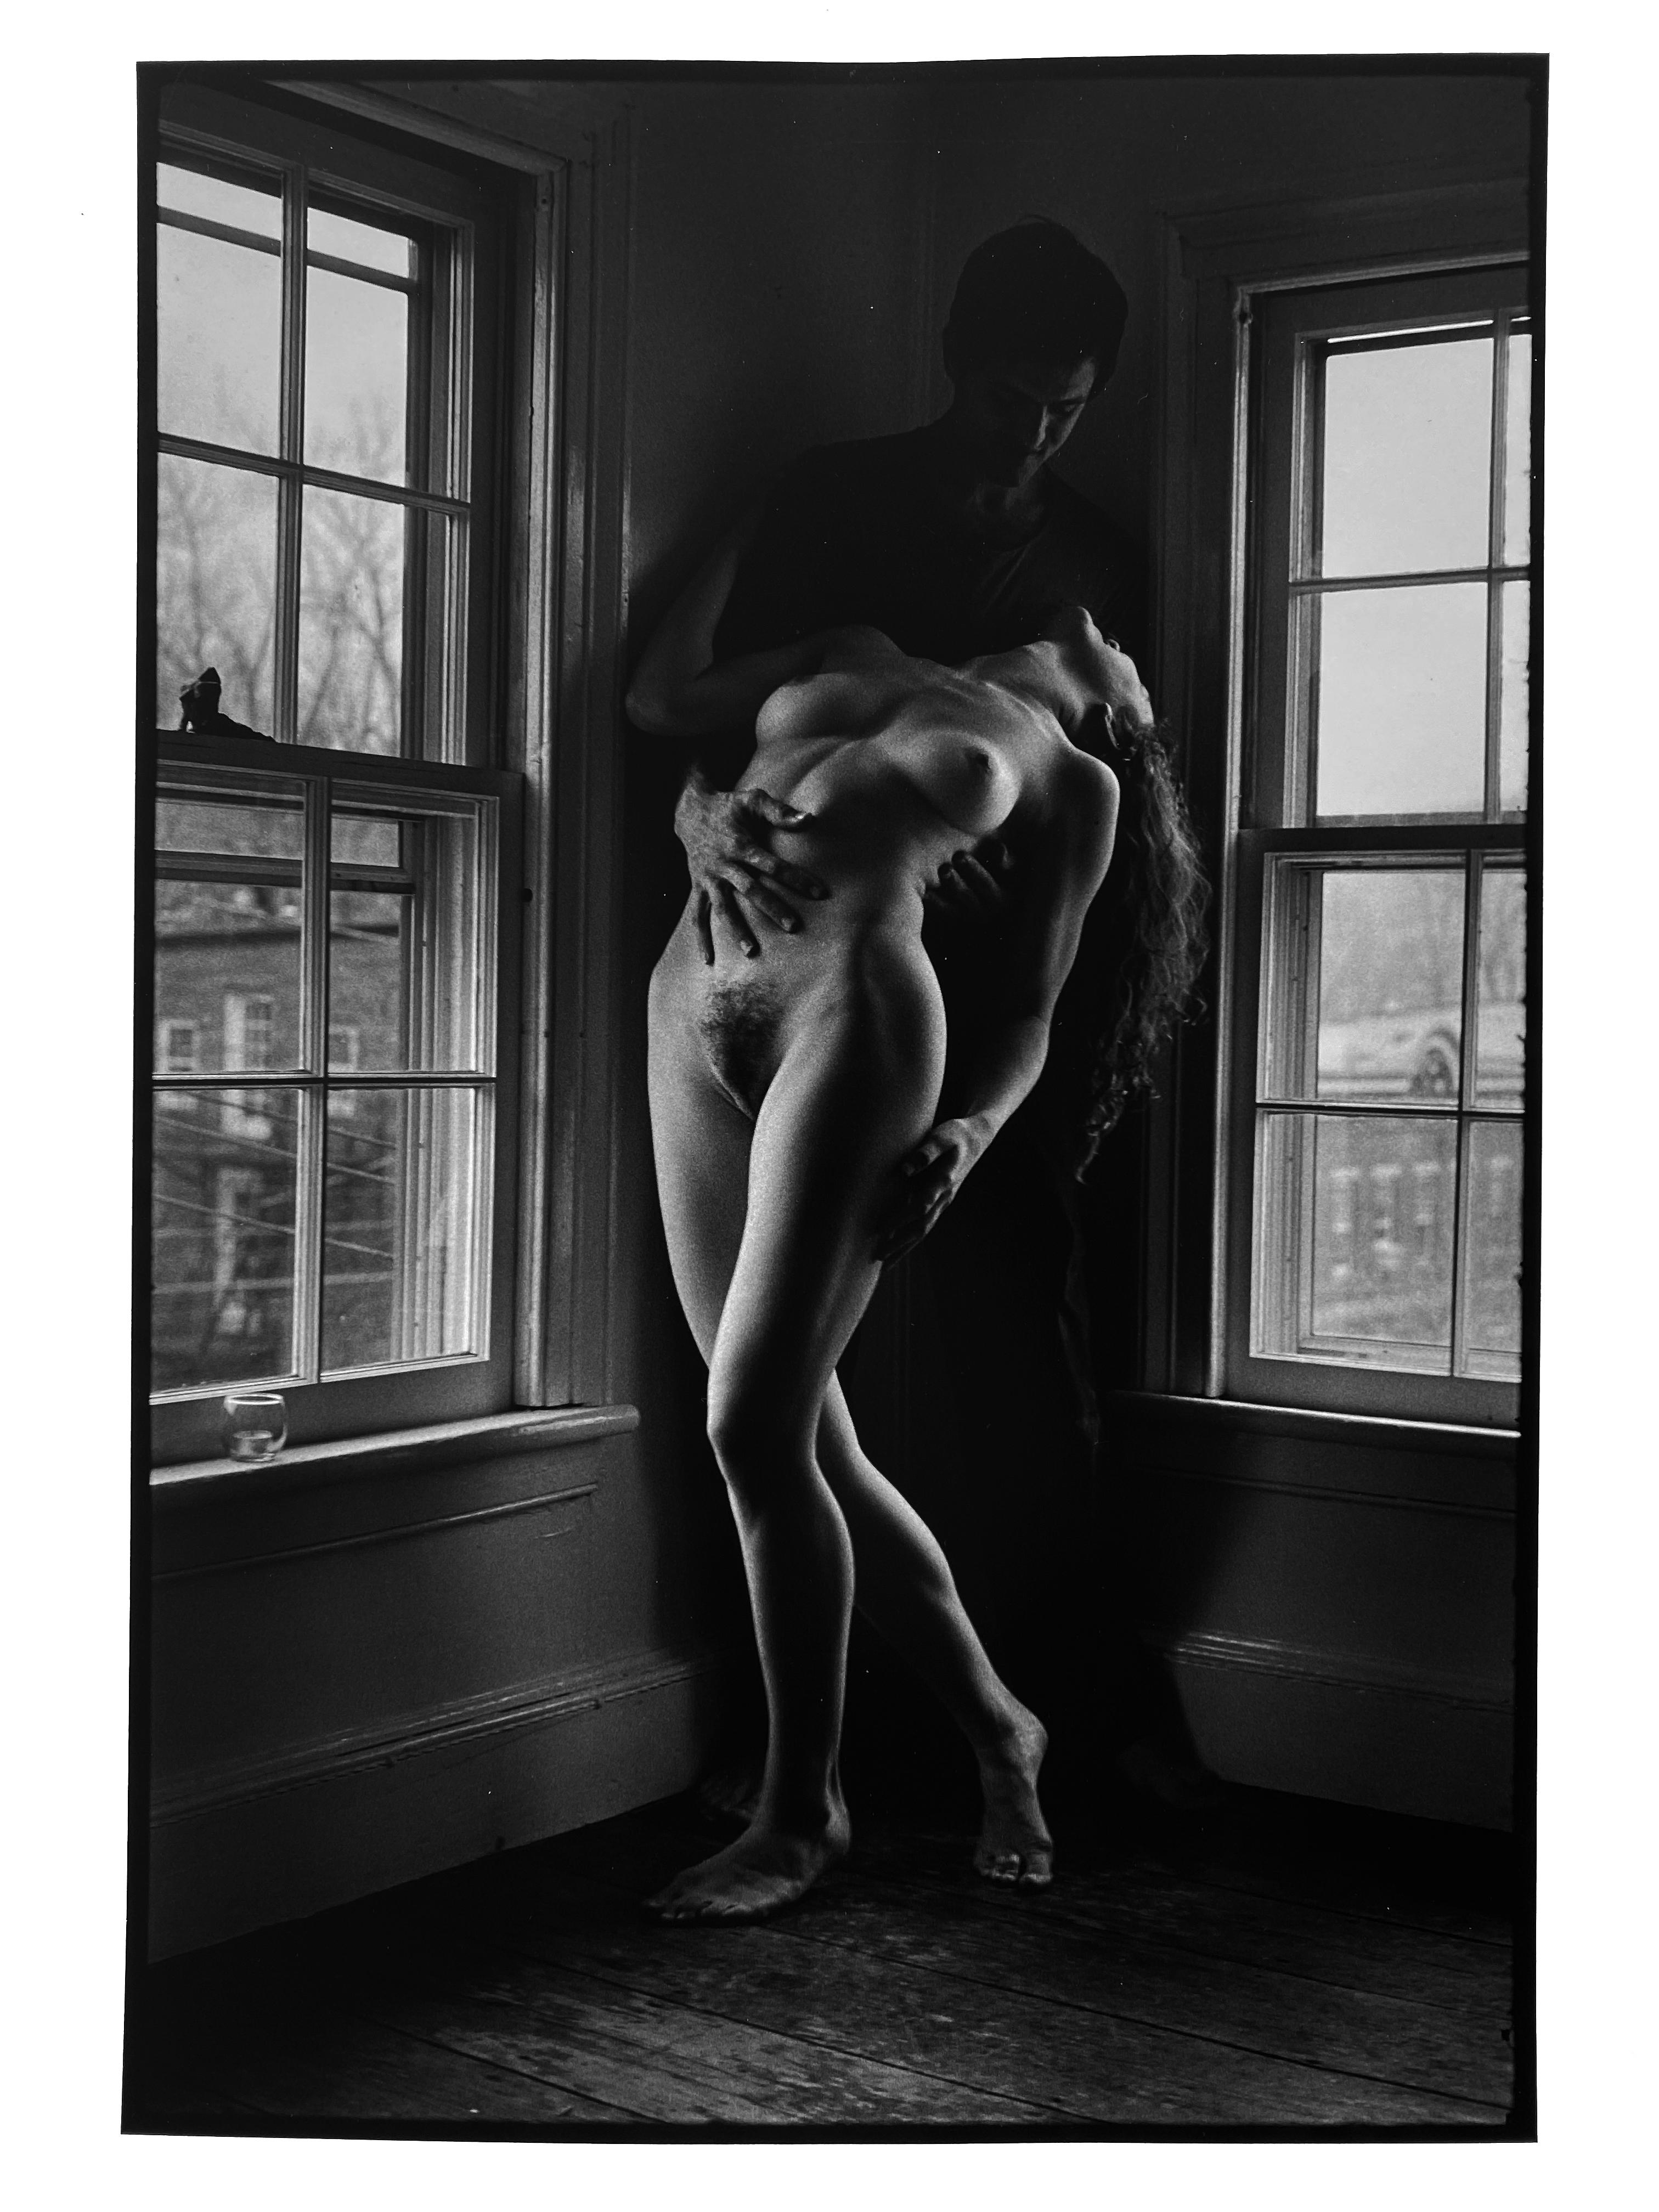 Kate Bending, Vintage Black and White Photography of Female Nude, Signed Print